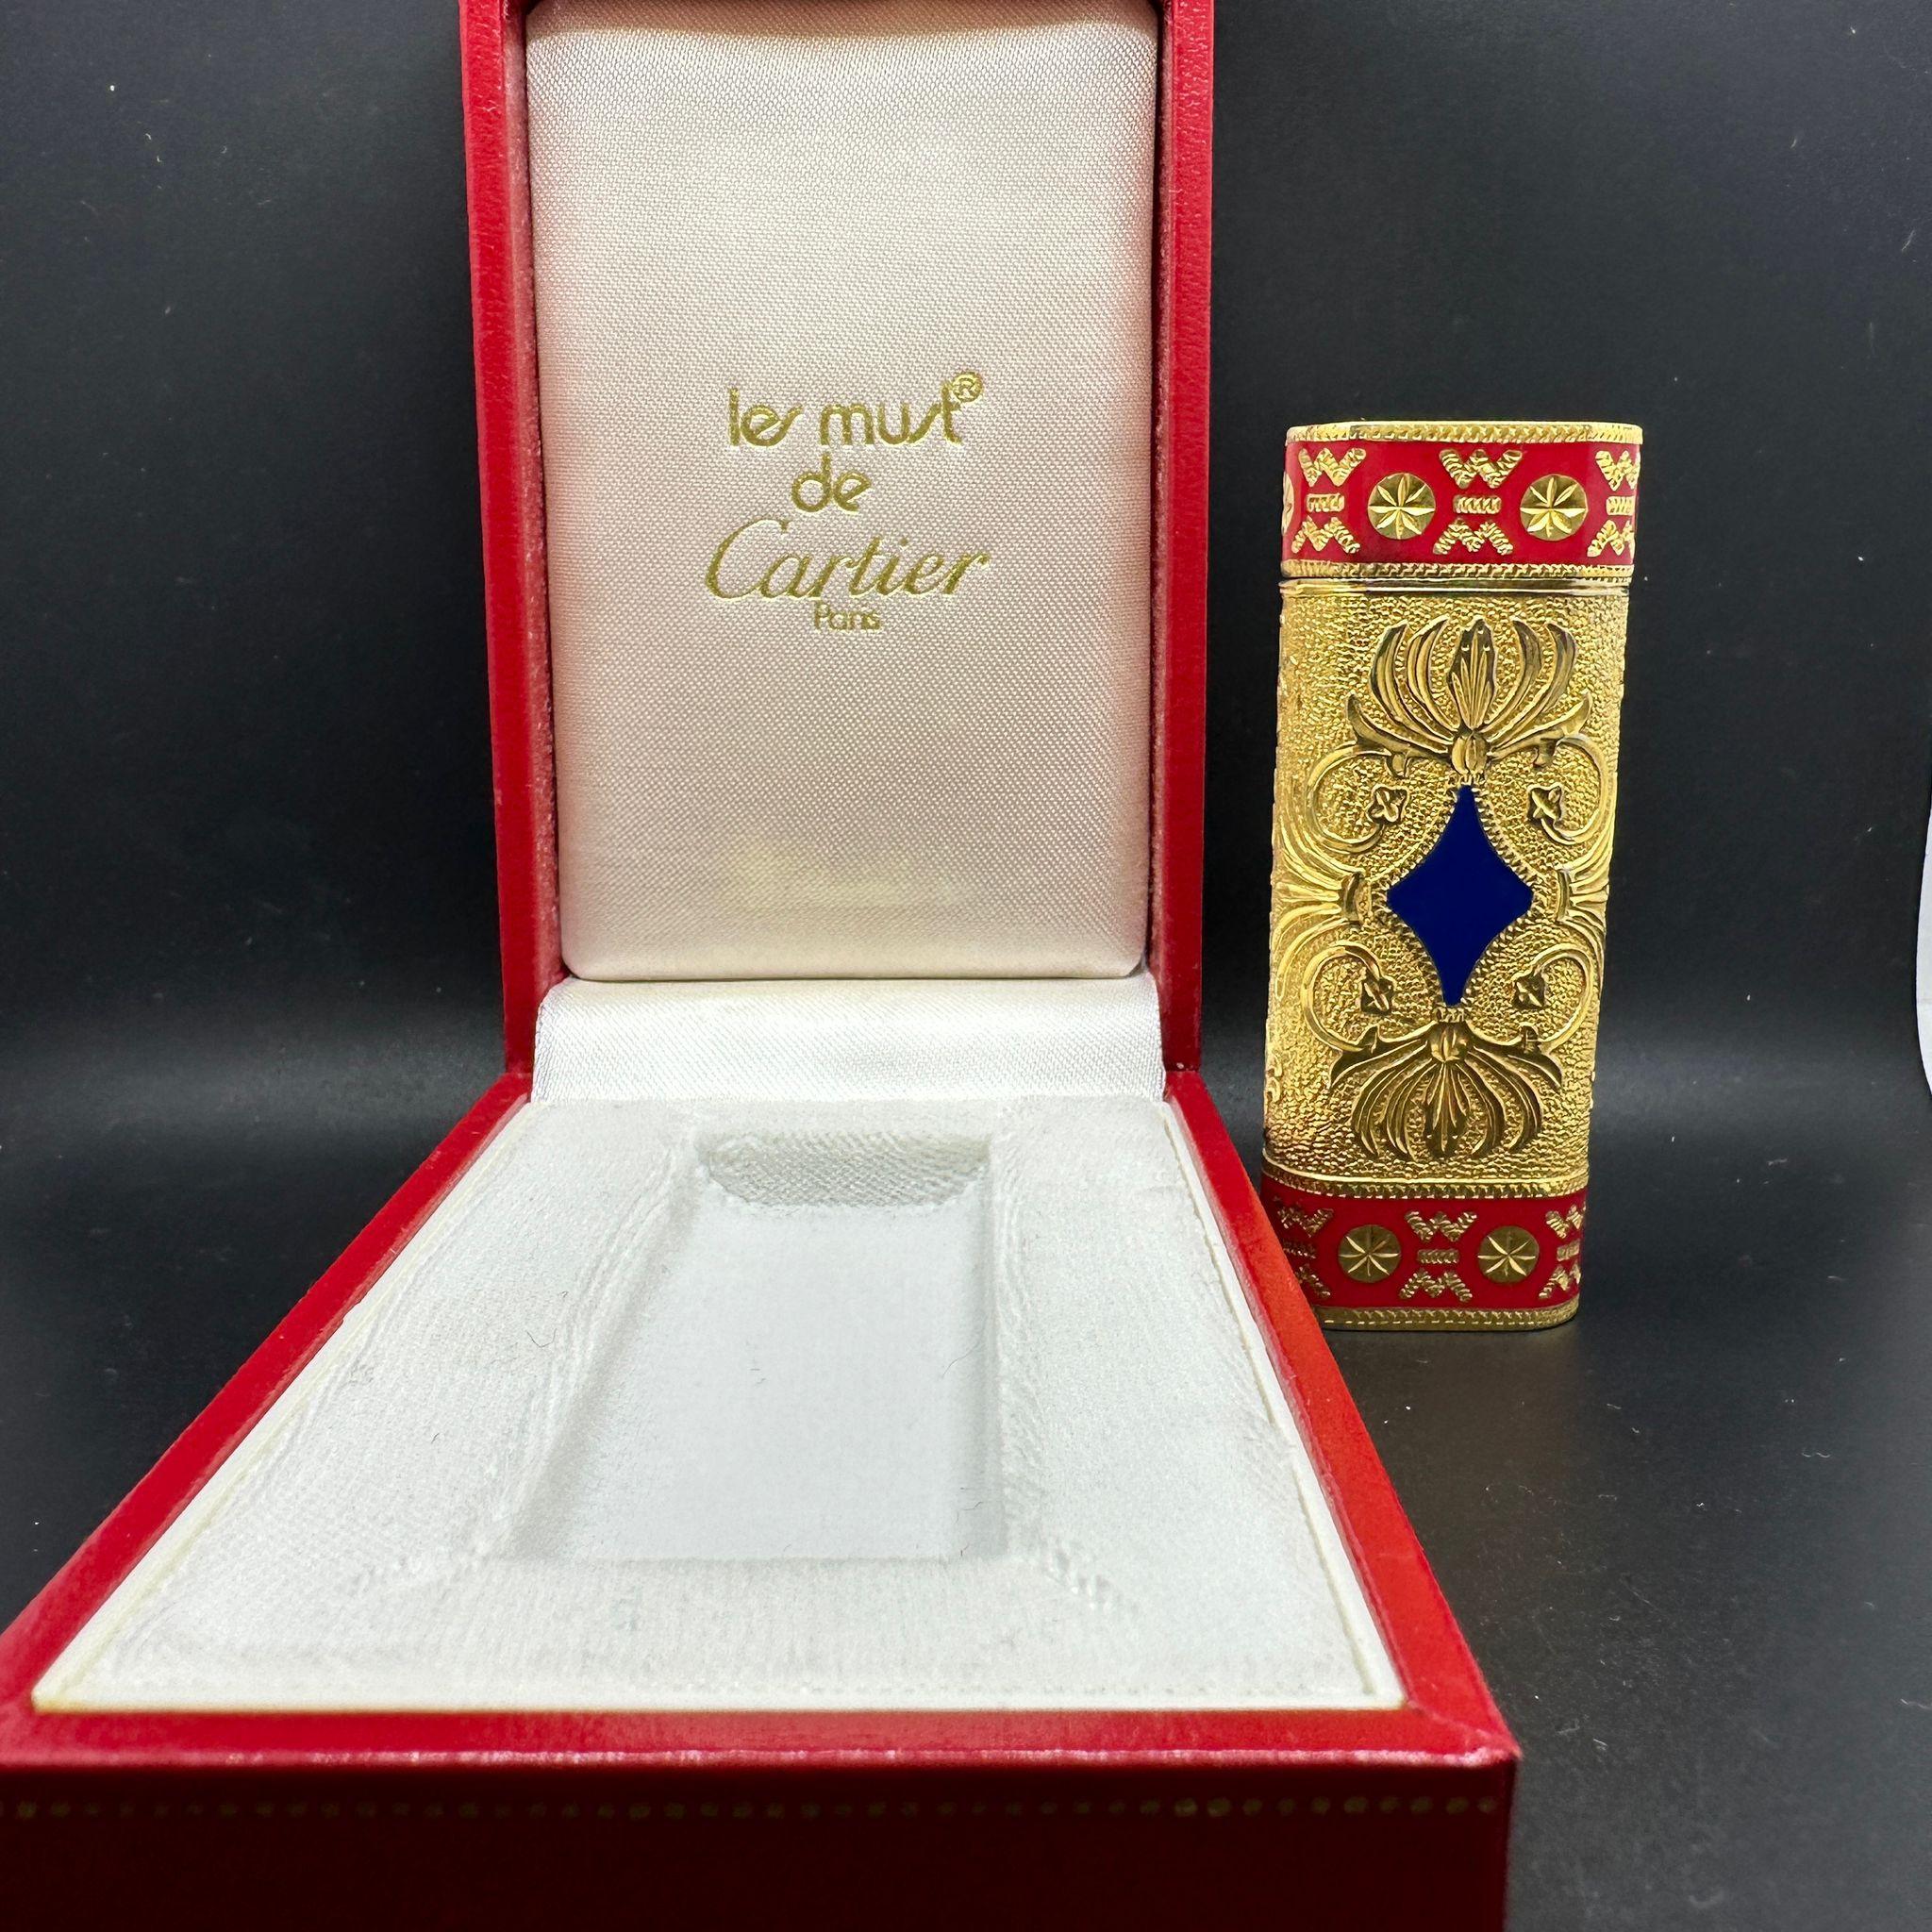 Cartier “Royking” lighter.
Circe 1970
CARTIER  Roy King Rollagas, a Unique RARE example of a ROYKING designed Cartier Rollagas lighter made circa 1970's, 18K Gold Baroque Inlay with Red and Blue lacquer, mint condition.
Roy King emblem on top side